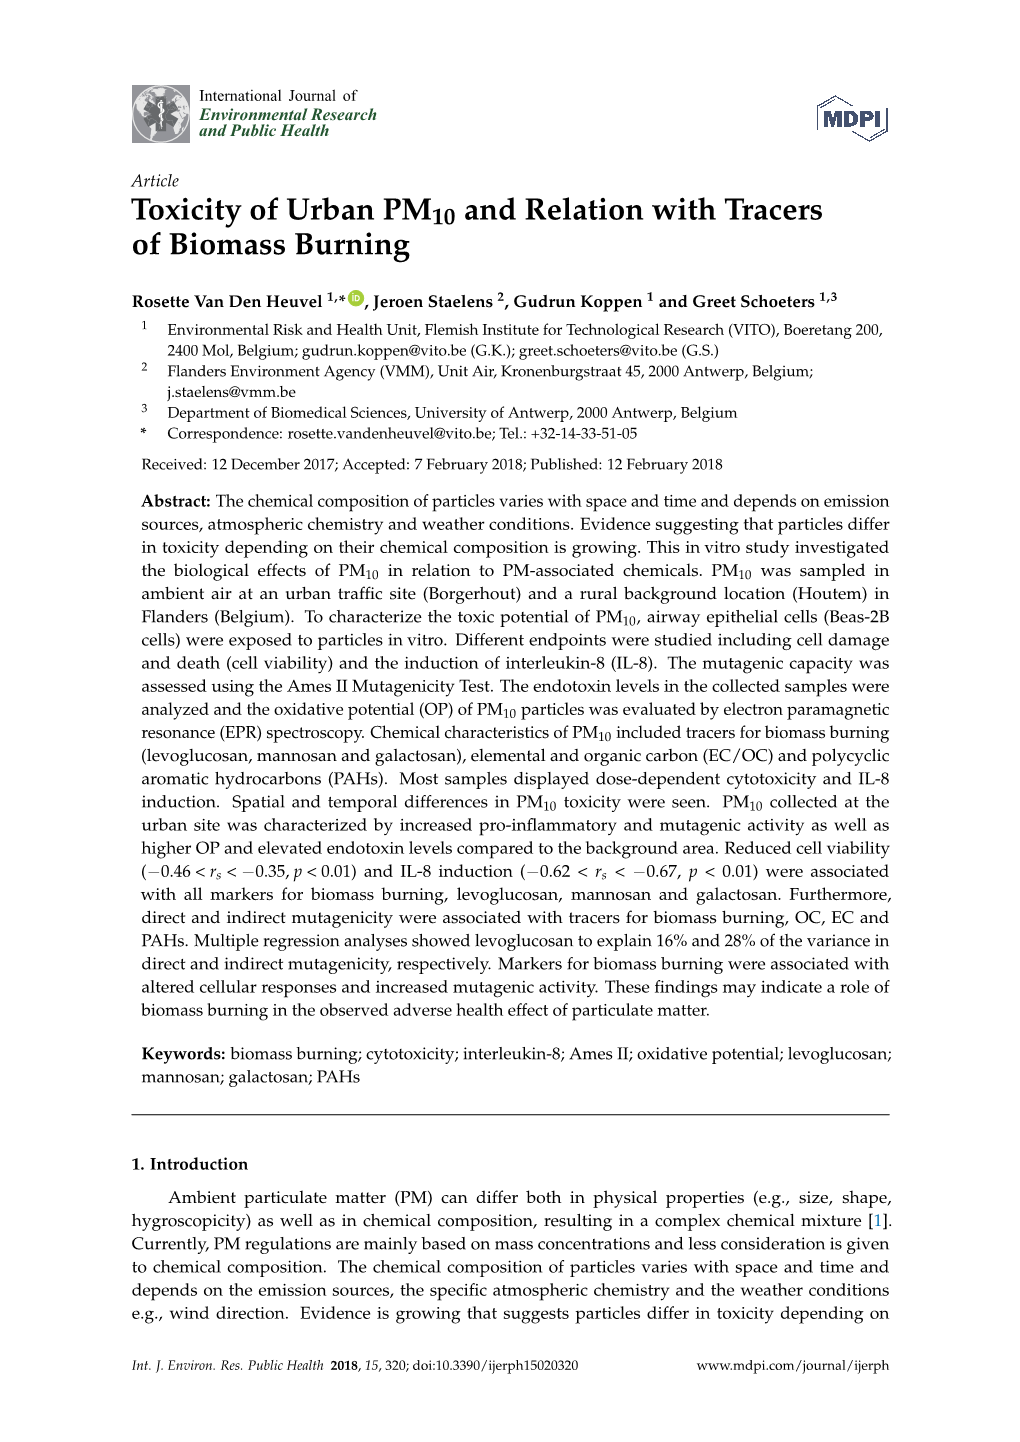 Toxicity of Urban PM10 and Relation with Tracers of Biomass Burning